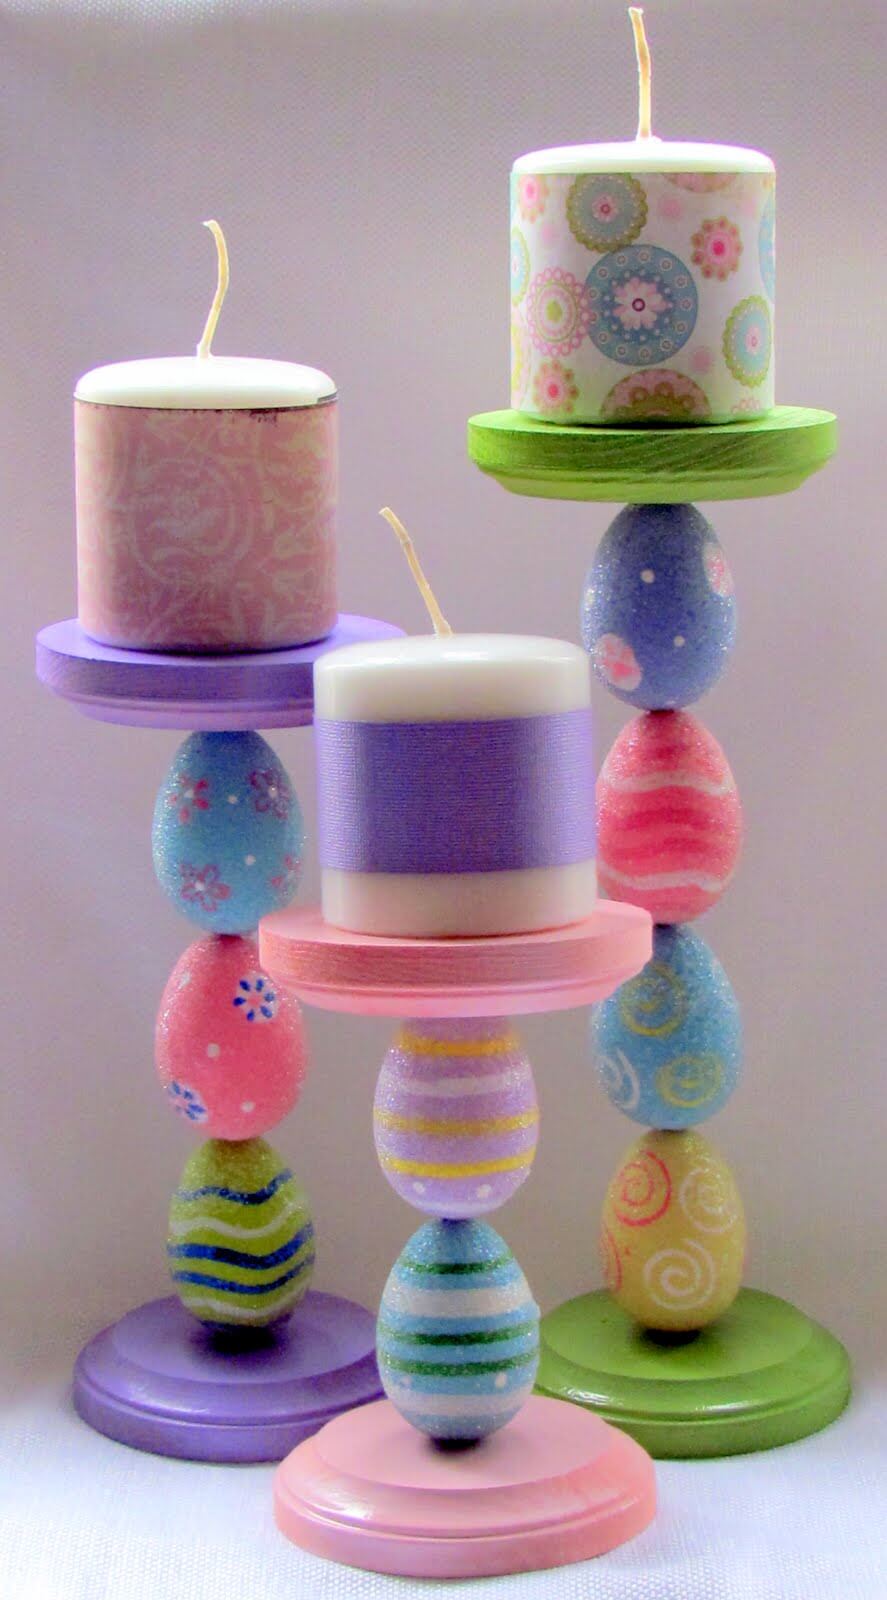 15 Awesome Easter Crafts To Make!